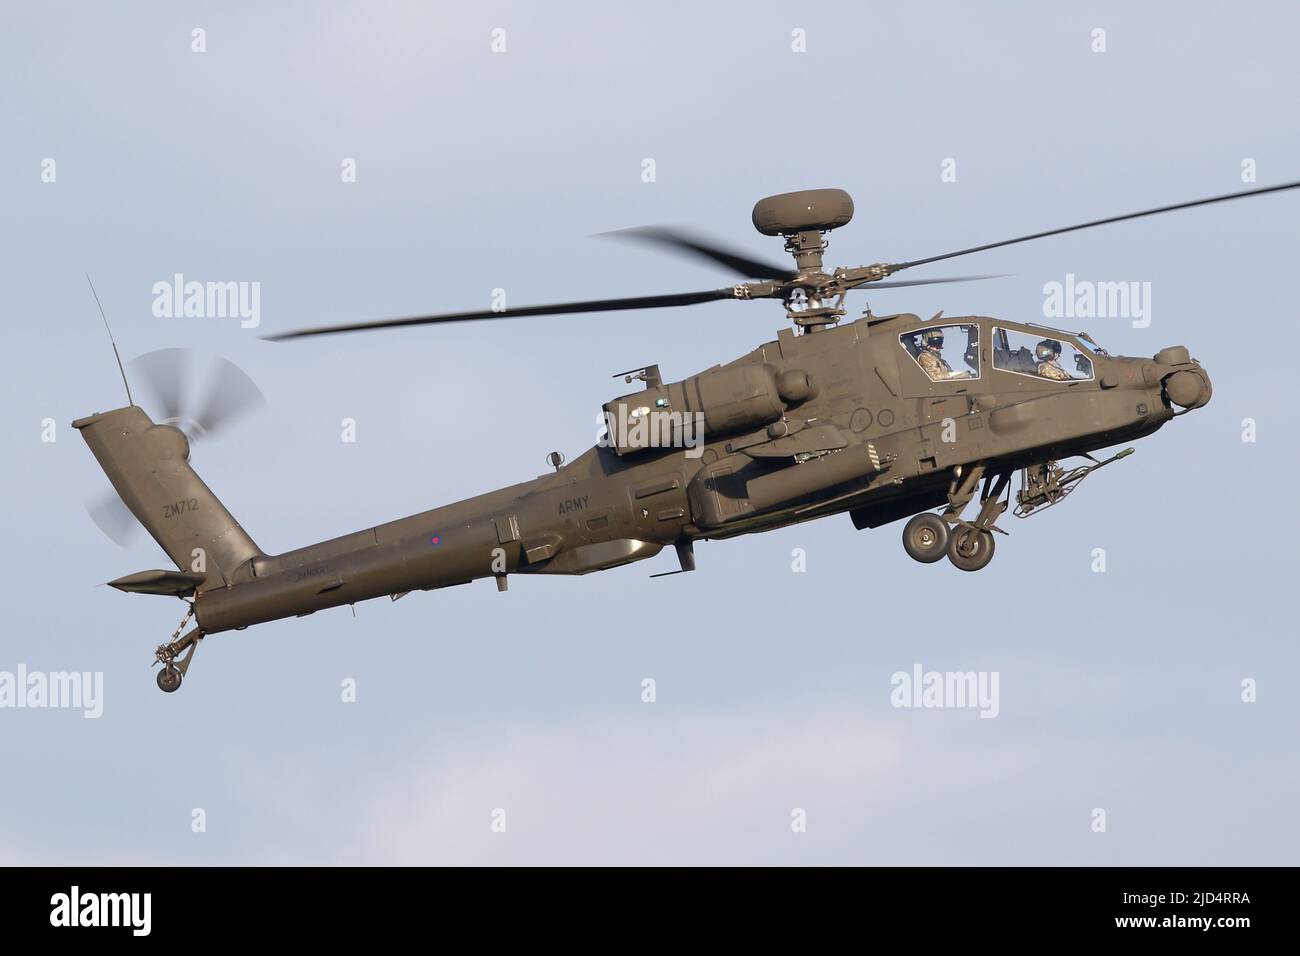 New Boeing built AH-64E Apache attack helicopter landing at Wattisham airfield. Stock Photo